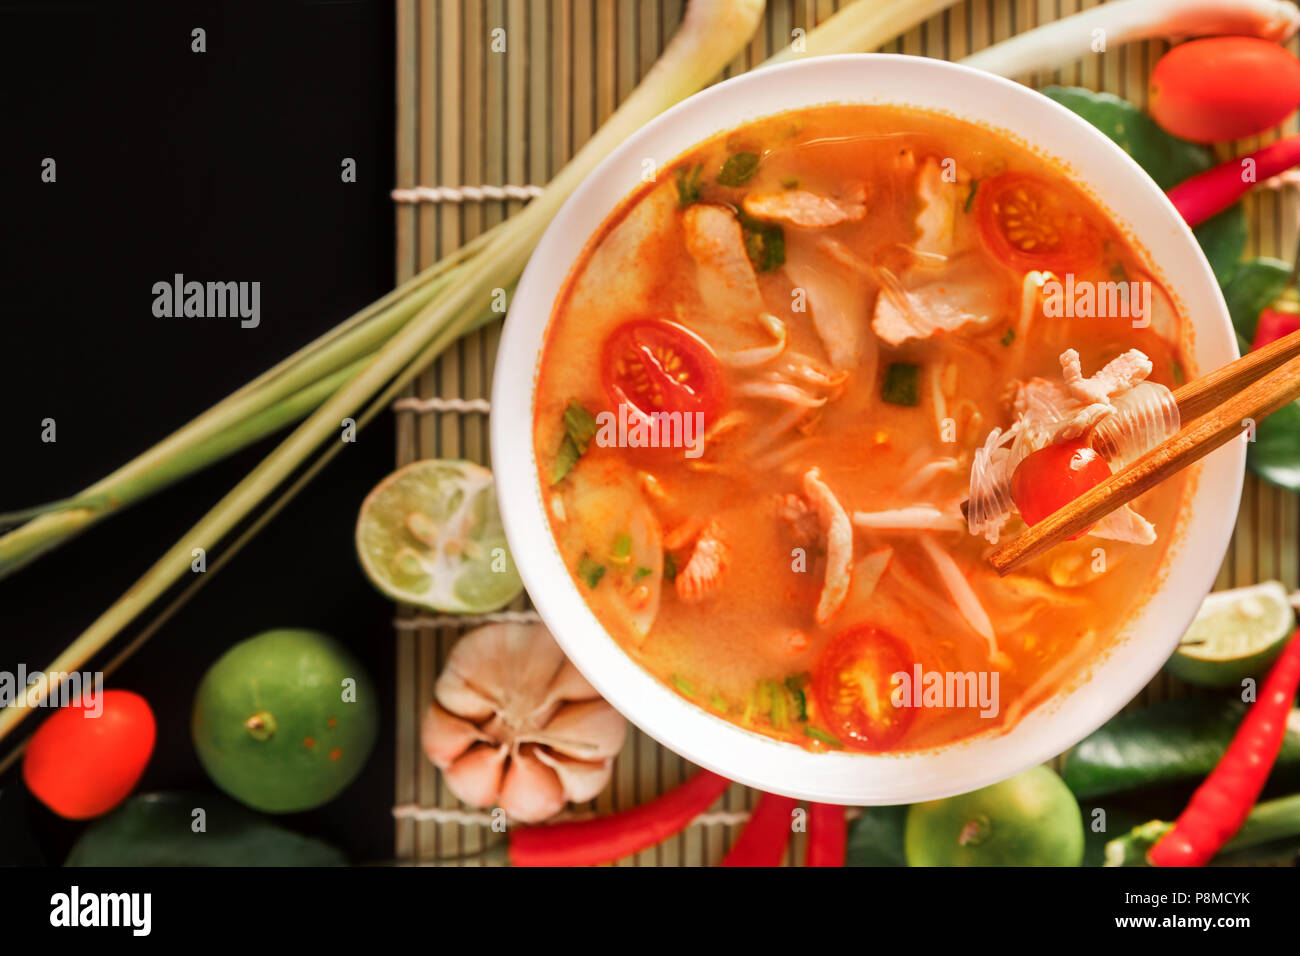 Tom Yum Gai or spicy tom yum soup with chicken - Authentic Thai style food. With ingredients: lemongrass, galangal, kaffir lime leaves, fresh chilies, Stock Photo